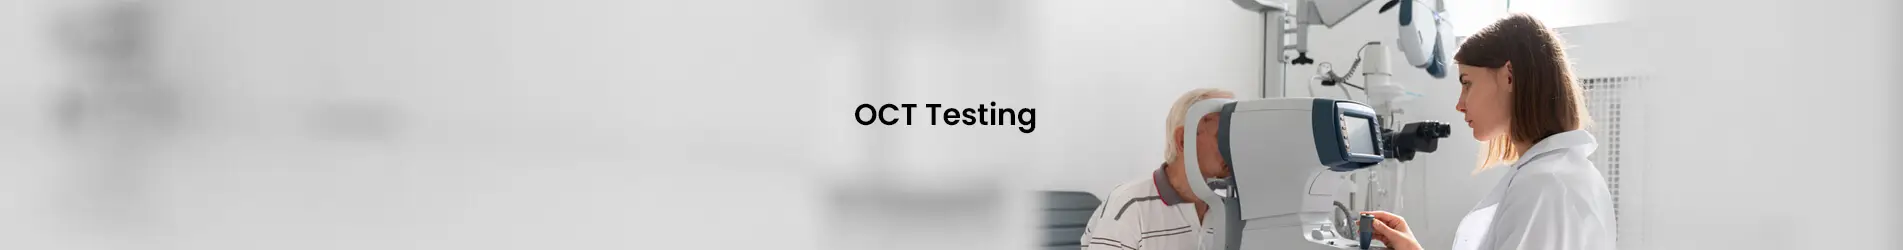 Eyes on Brickell: Professional-OCT-Testing-Miami-banner